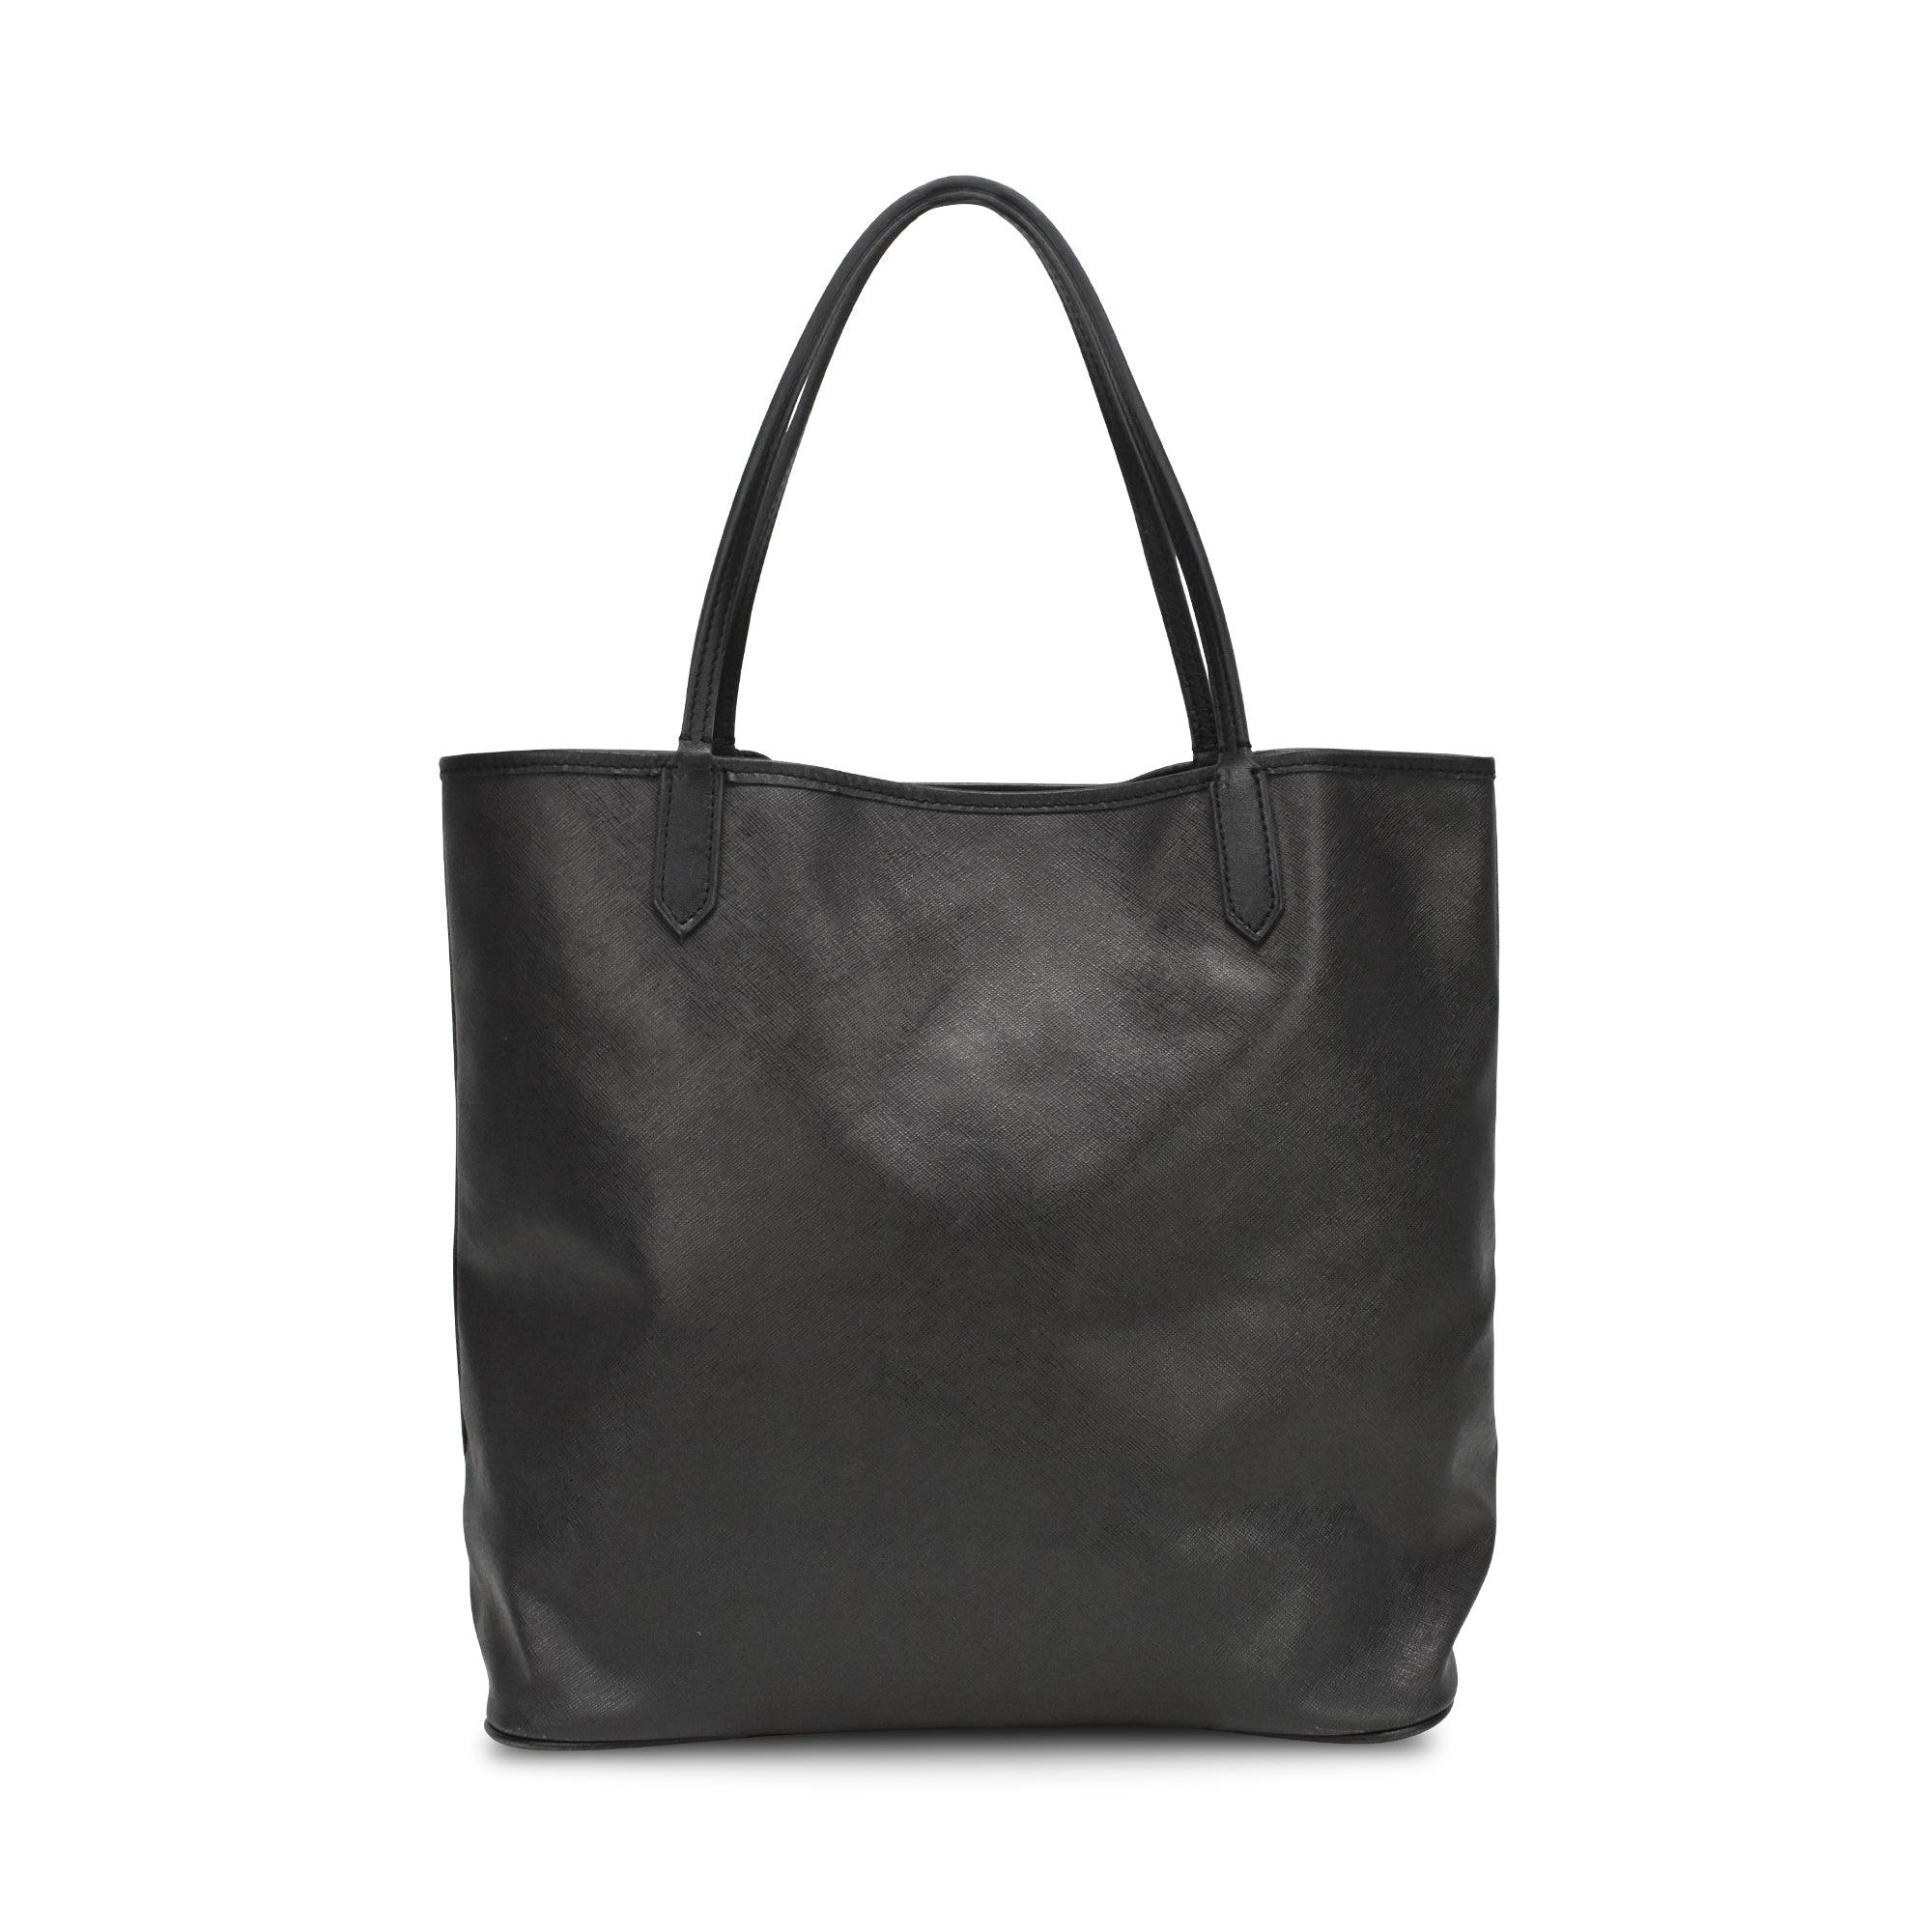 Givenchy Tote Bag - Fashionably Yours